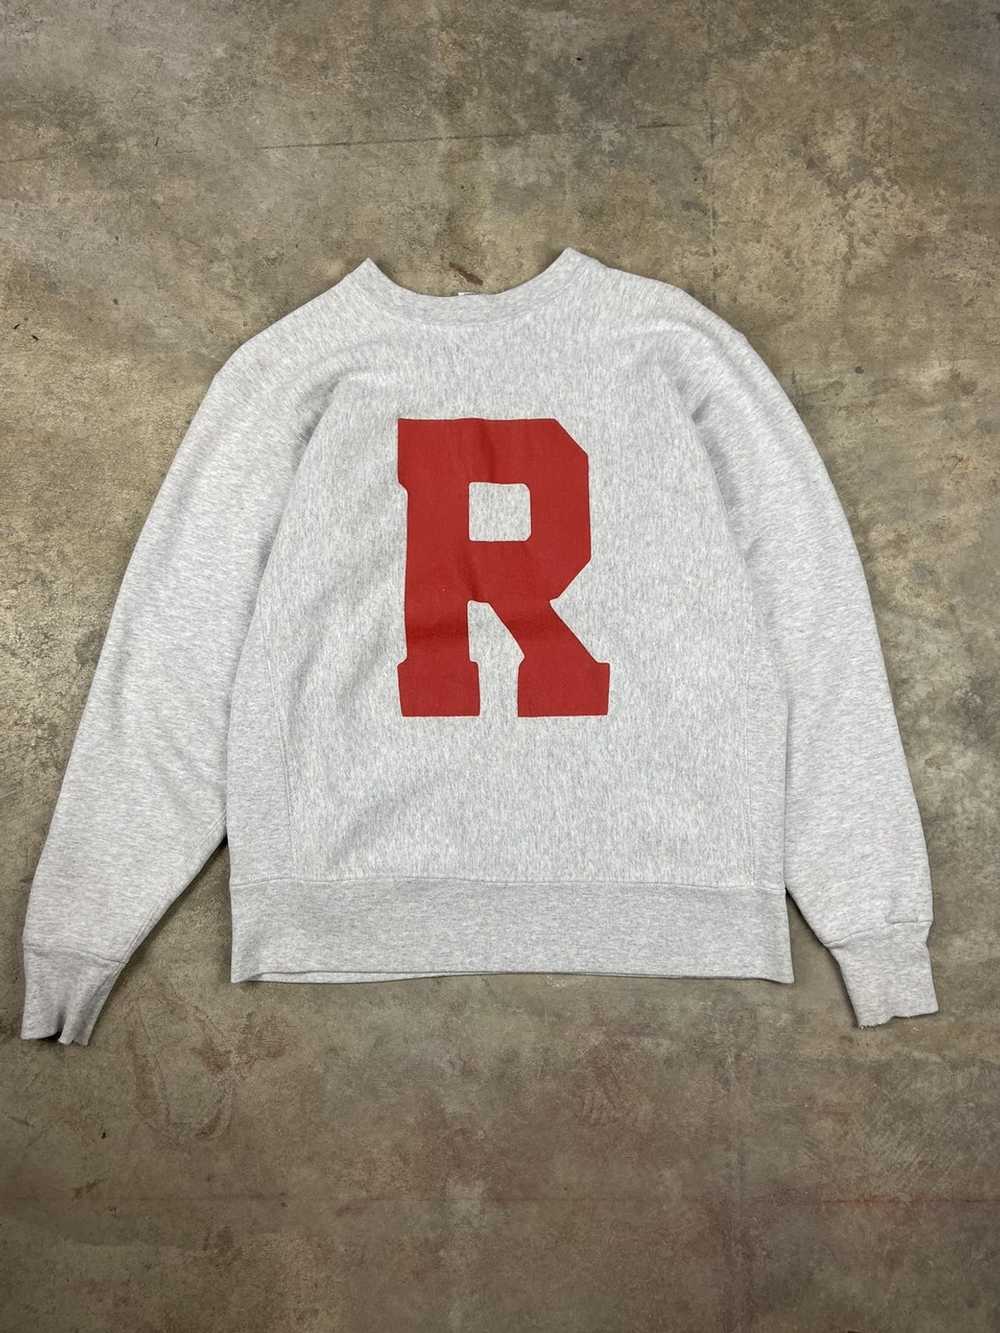 Made In Usa × Vintage Vintage 90s Rutgers univers… - image 2